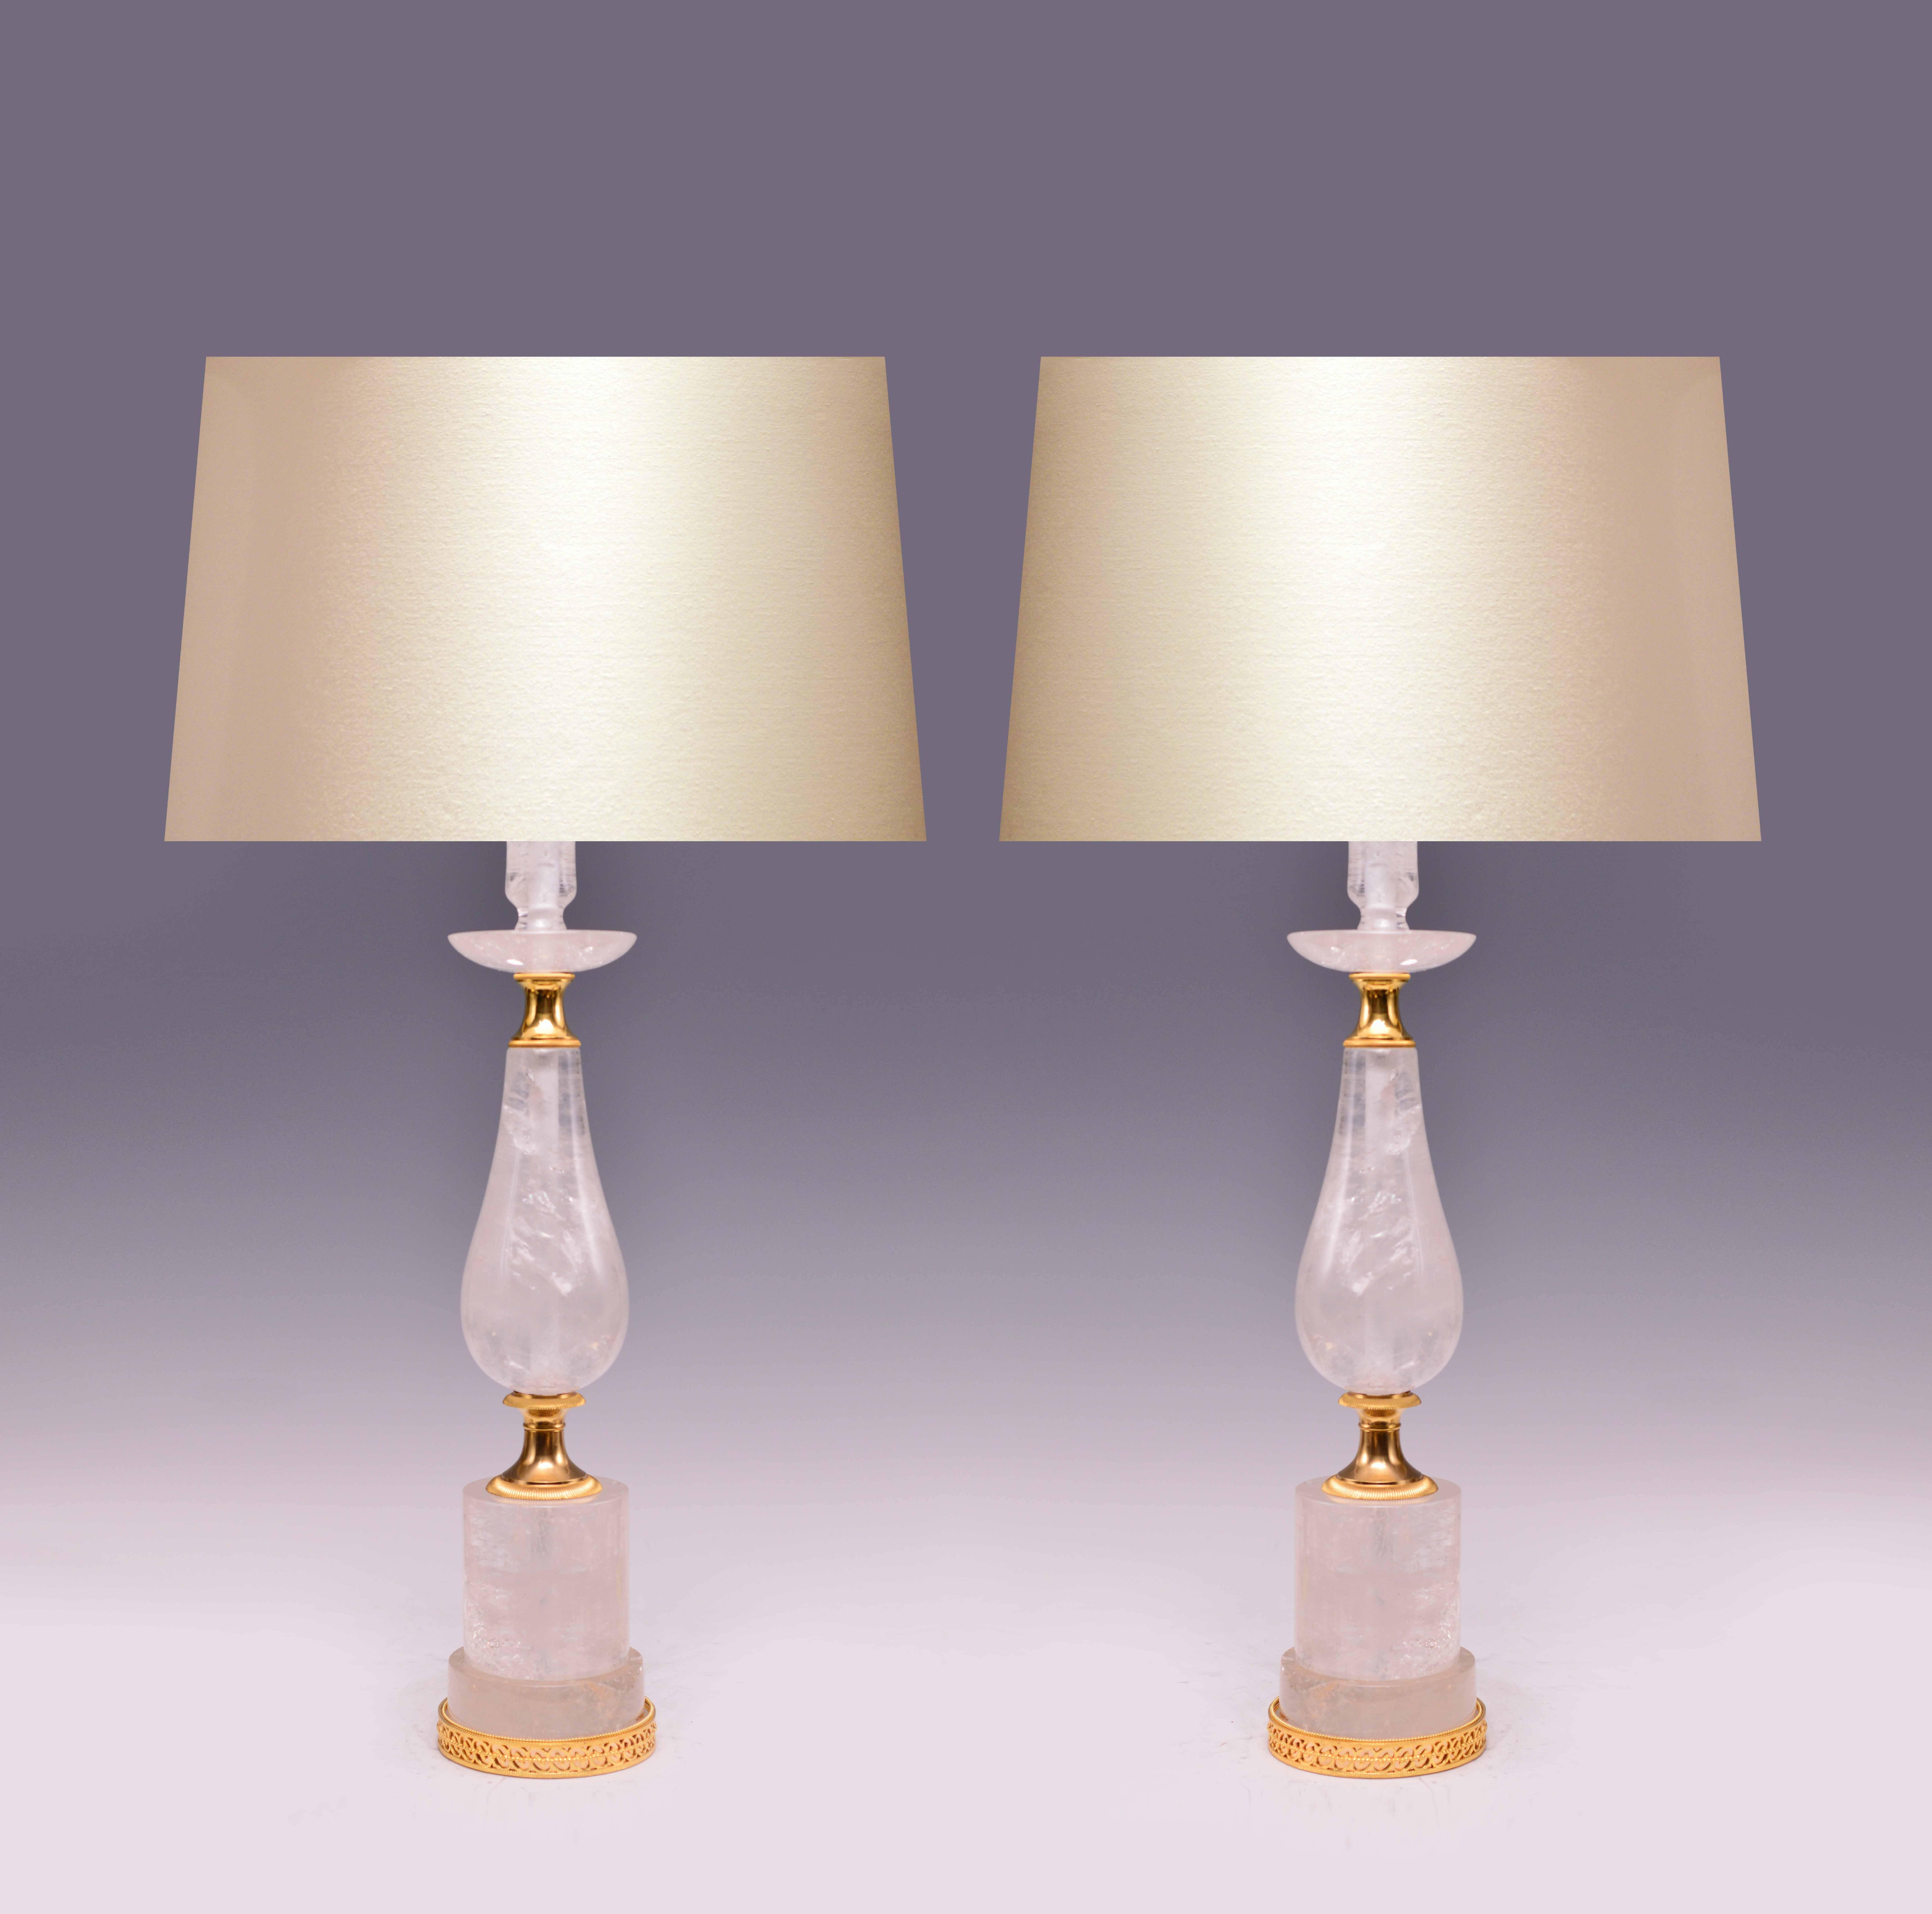 A pair of ormolu-mounted rock crystal quartz lamps. Custom finish available, created by Phoenix Gallery, NYC.
Measures: To the rock crystal: 23 inch H.
(Lampshade not included)
